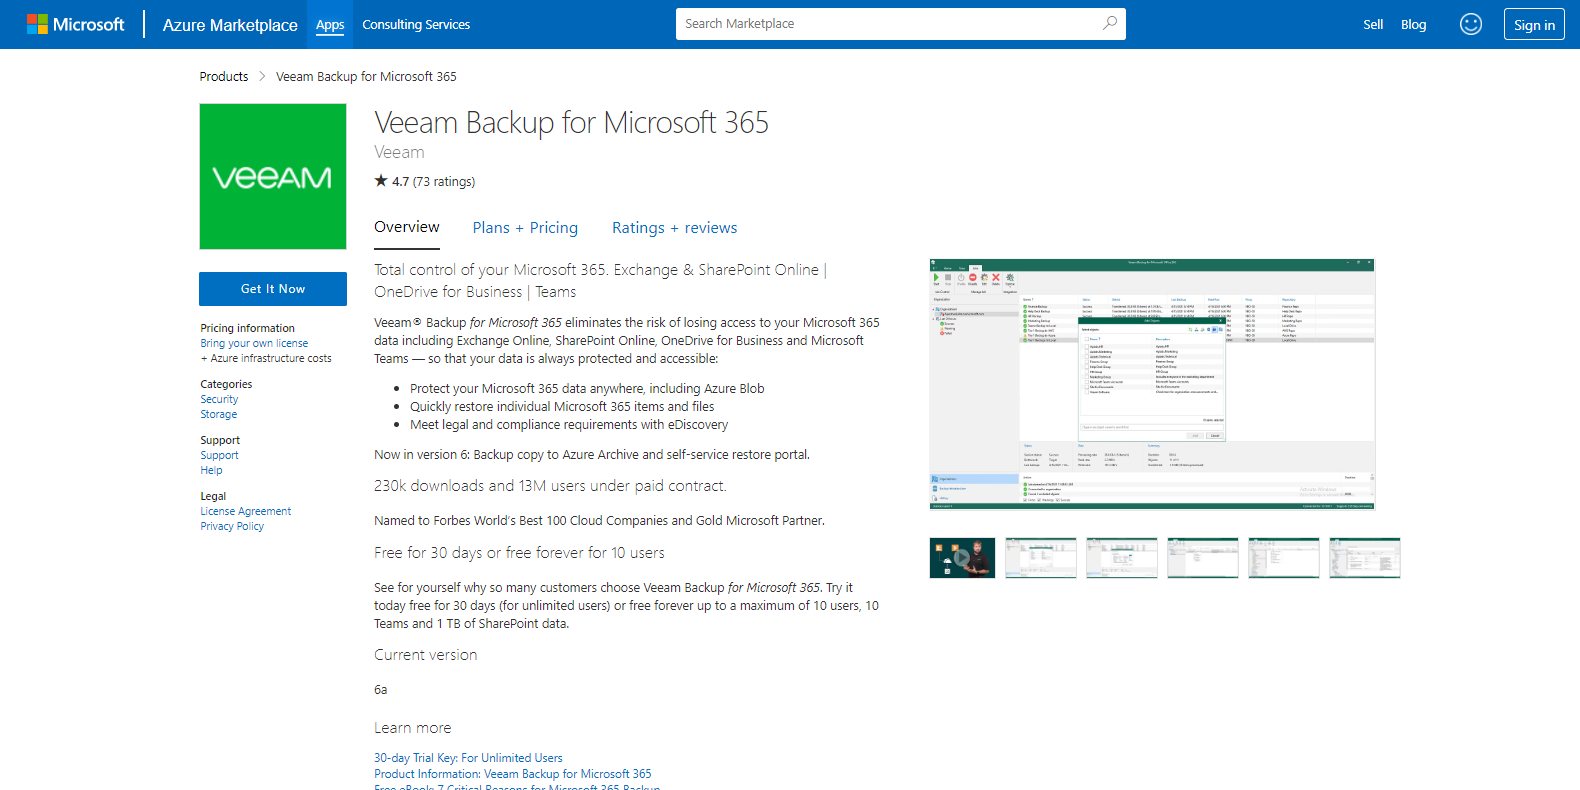 You can deploy Veeam Backup for Microsoft 365 directly in the Azure Marketplace on a virtual machine. 